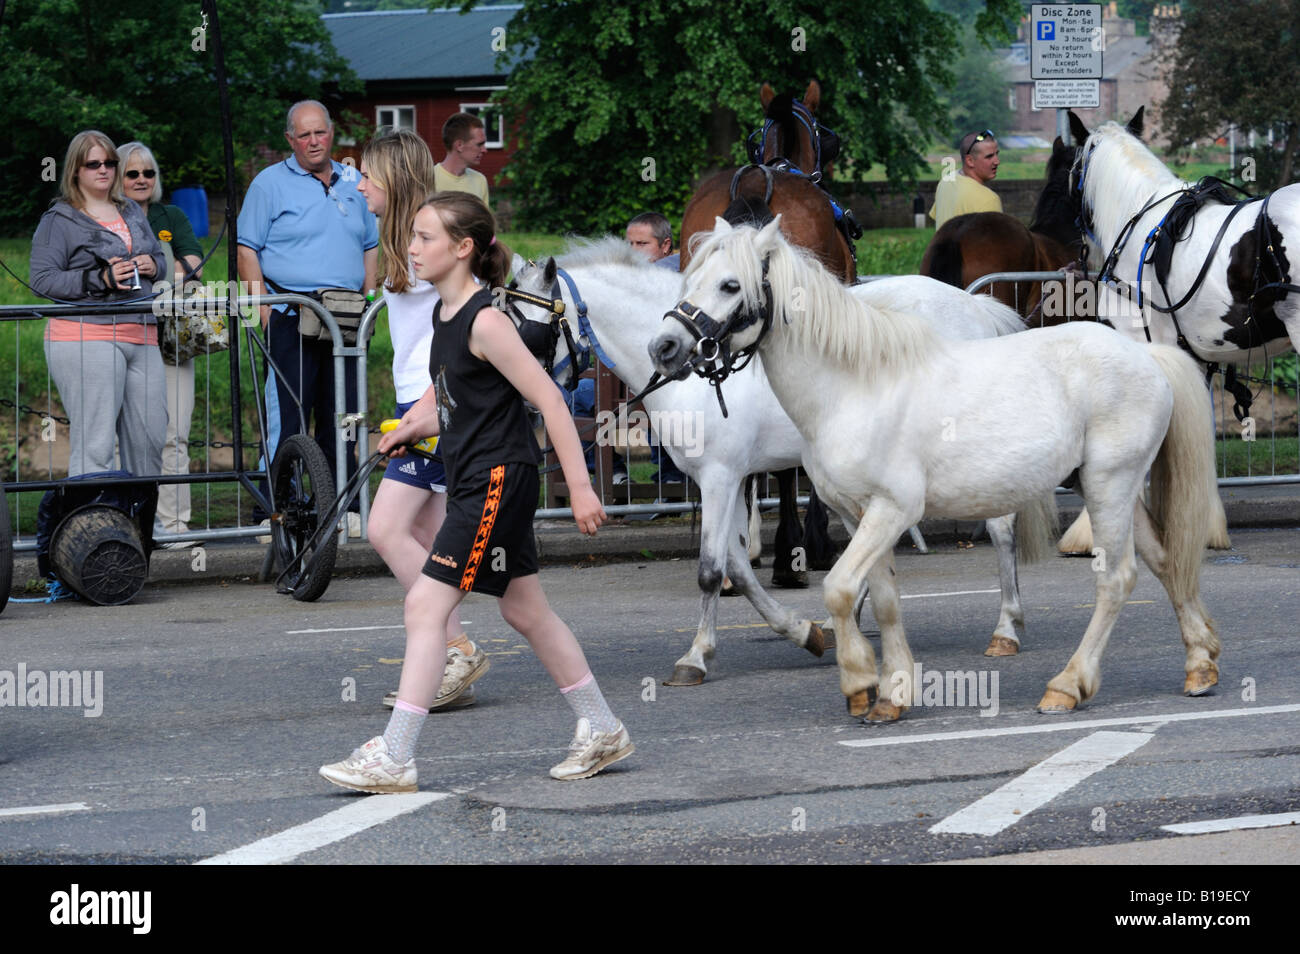 Two gypsy traveller girls leading ponies. Appleby Horse Fair. Appleby-in-Westmorland, Cumbria, England, United Kingdom, Europe. Stock Photo